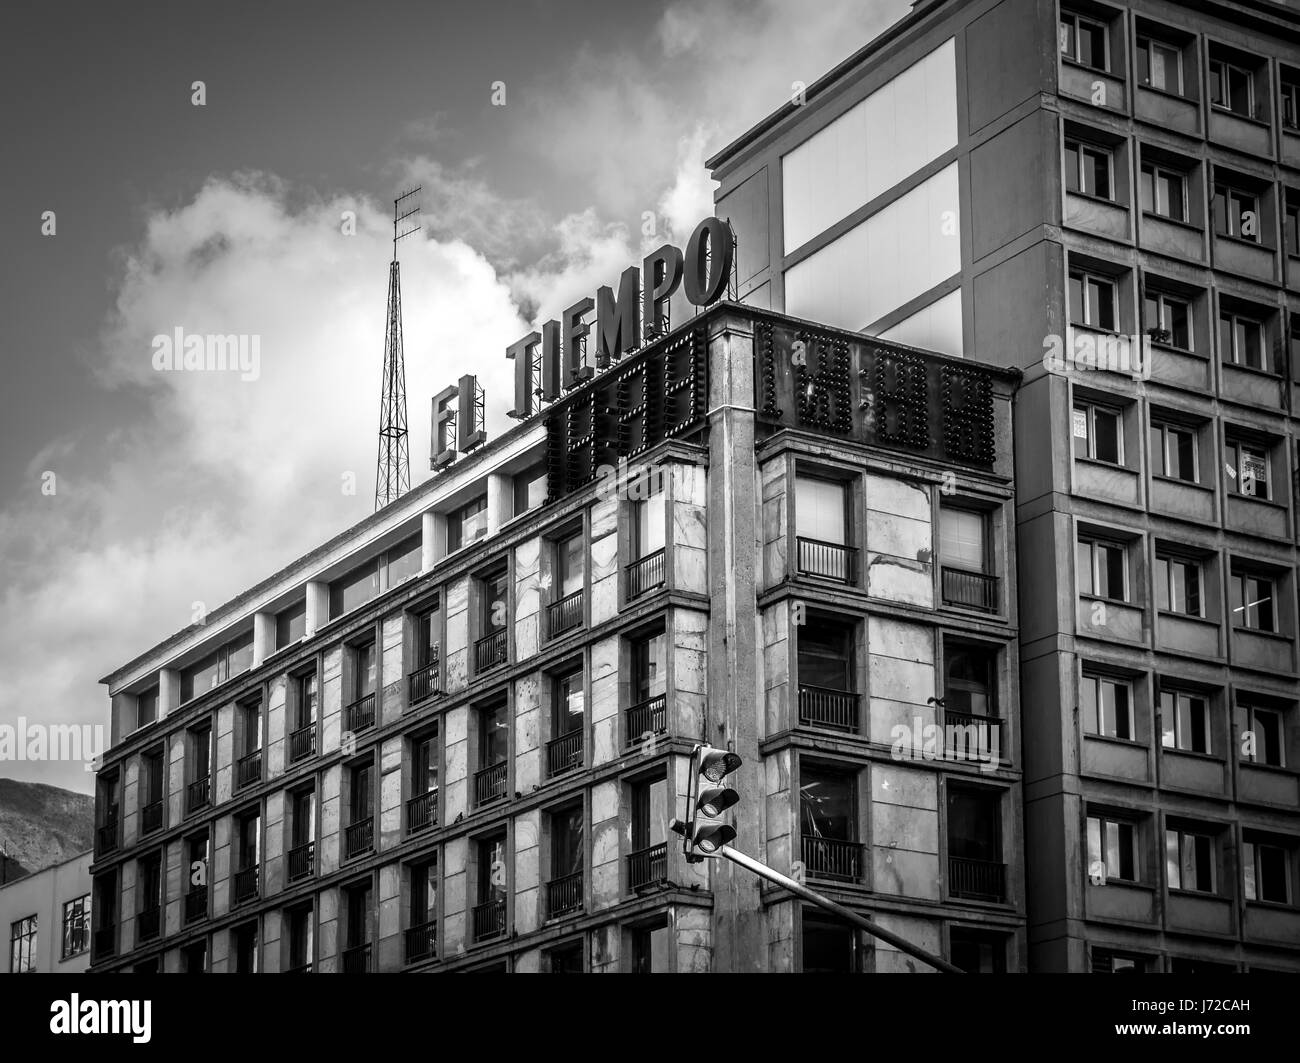 BOGOTA, COLOMBIA - Aug, 2016: Black and White Building in Downtown Bogota - Bogota, Colombia Stock Photo